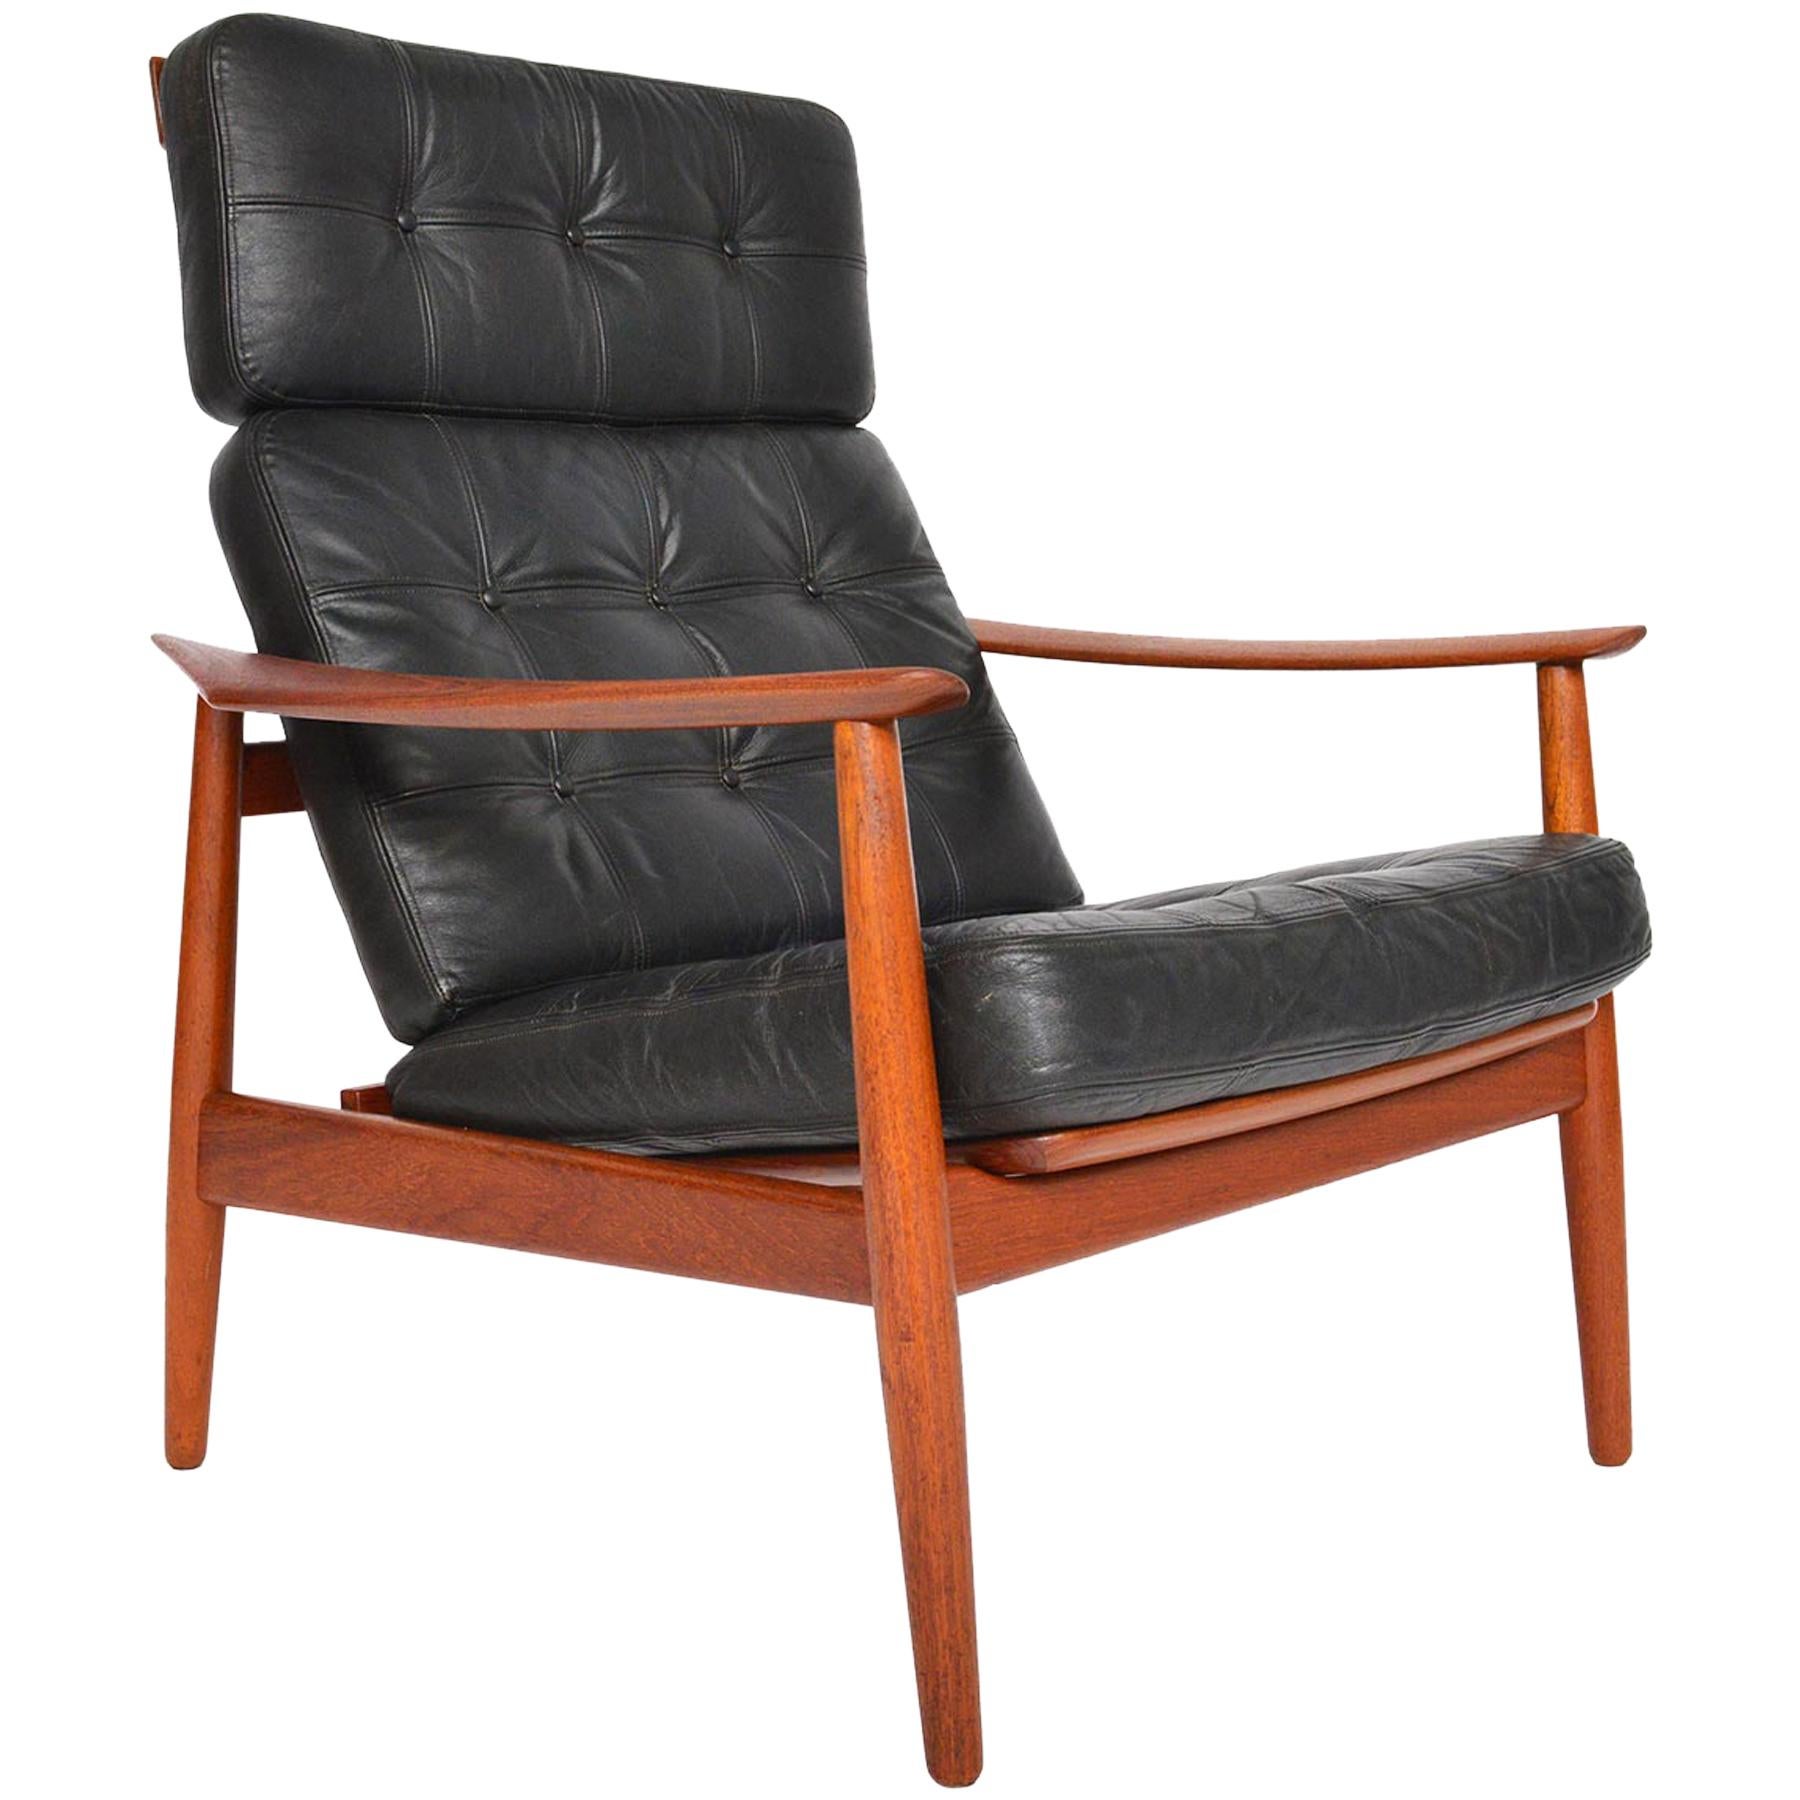 Arne Vodder Model 164 Leather and Teak High Back Reclining Lounge Chair